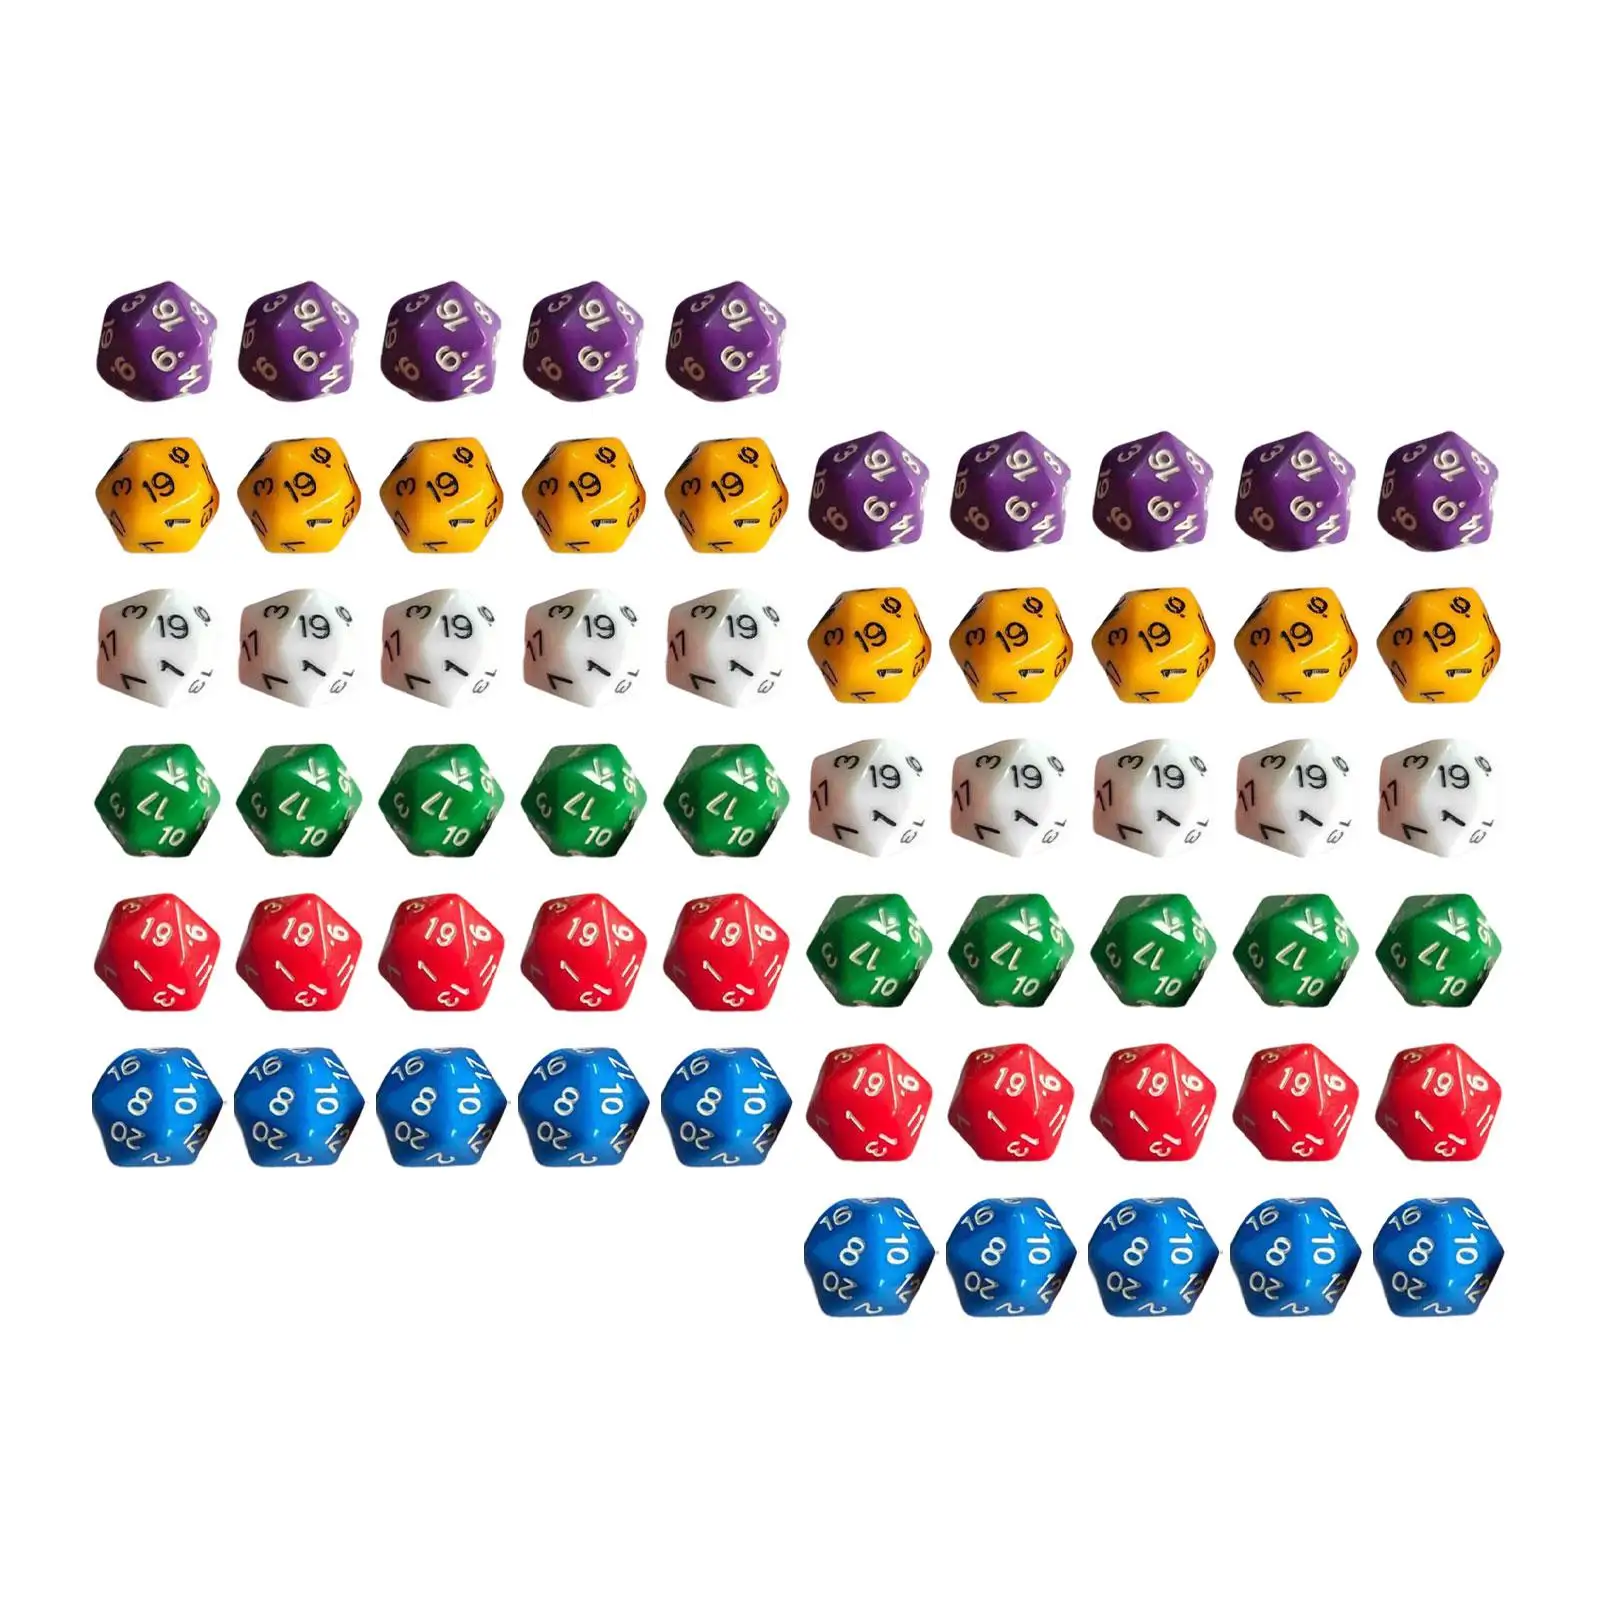 60 Pieces 20 Sided Dice 20mm Party Supplies Role Playing Game Dices Multi Sided Dices for Card Game Board Game Role Playing Game